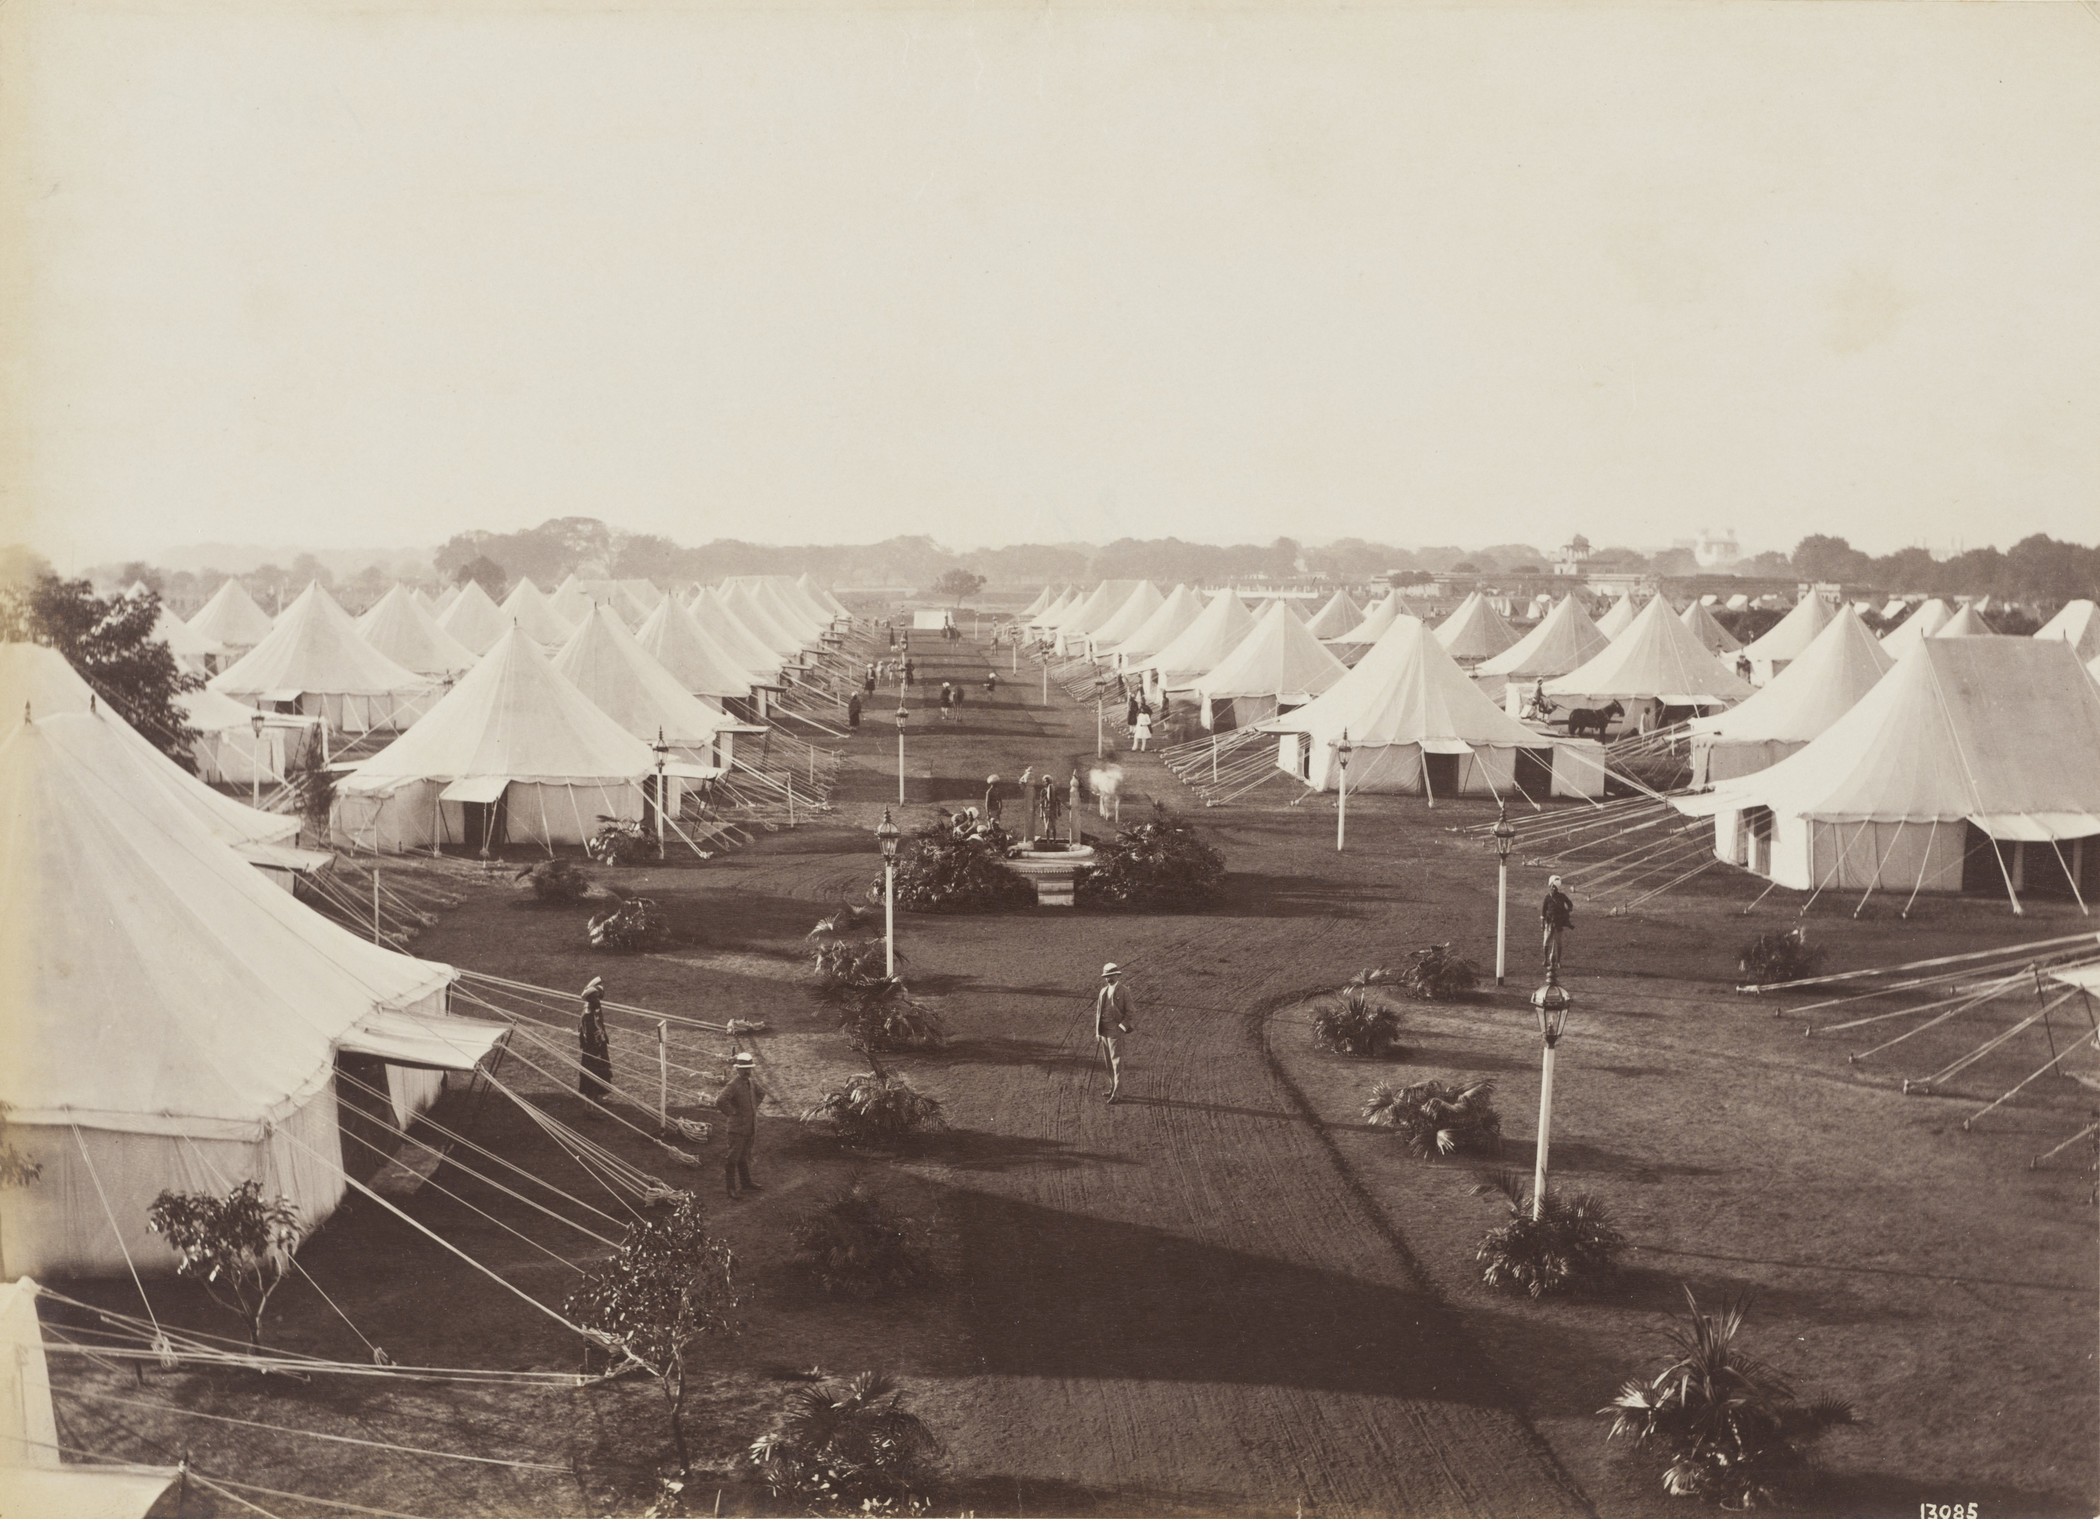 Lala Deen Dayal, Guest Camp, Gwalior, December 1894, 1894, Los Angeles County Museum of Art, gift of Gloria Katz and Willard Huyck, photo © Museum Associates/LACMA